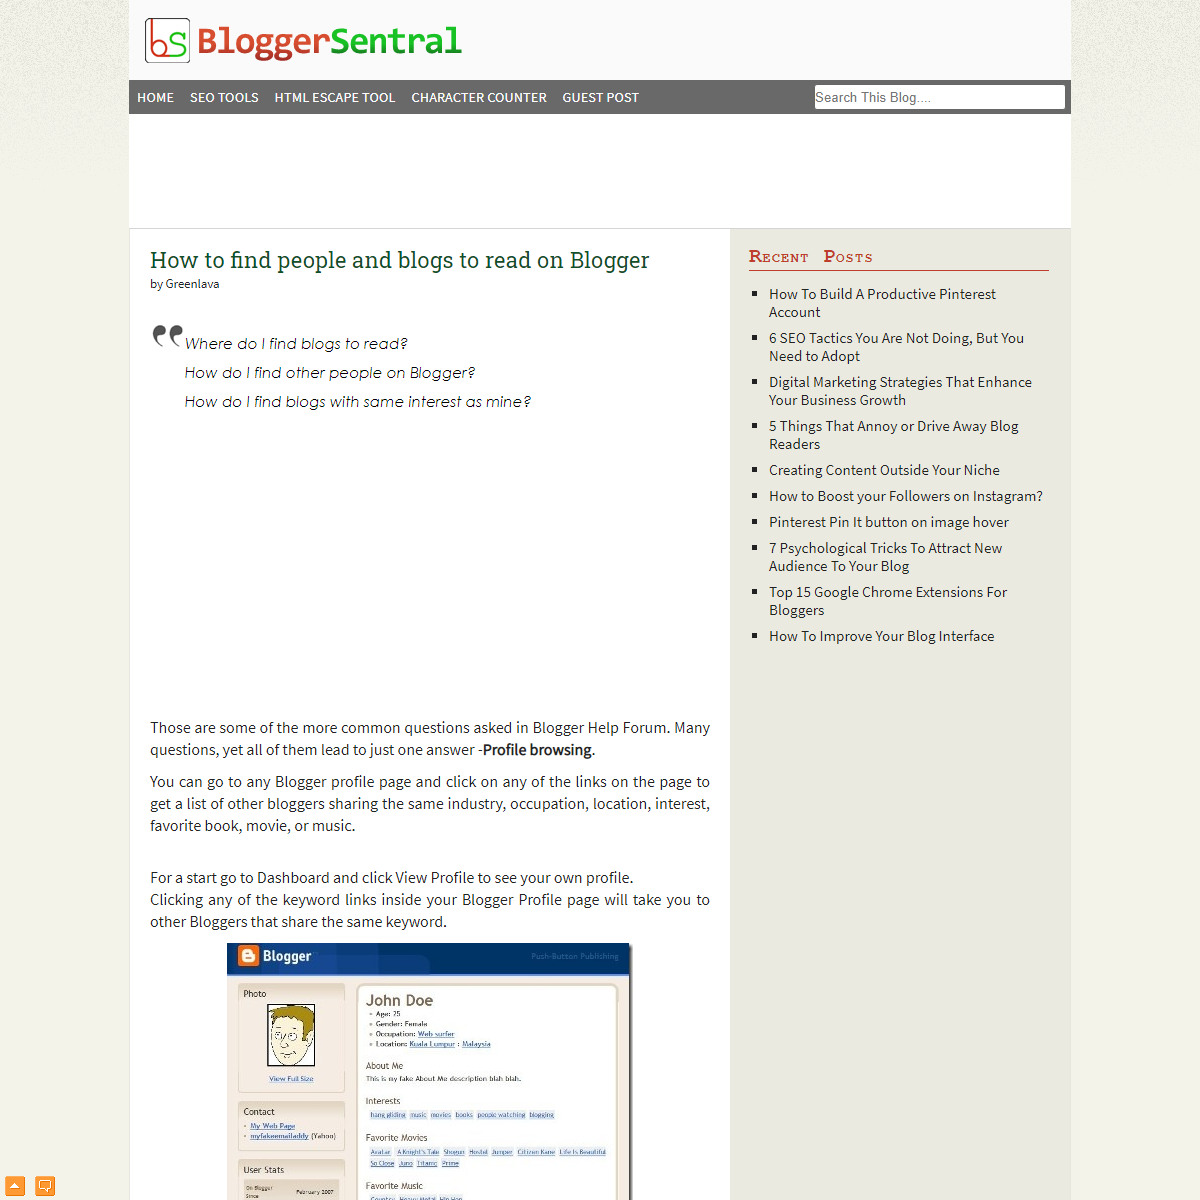 A complete backup of http://www.bloggersentral.com/2010/03/finding-blogs-to-read-on-blogger.html